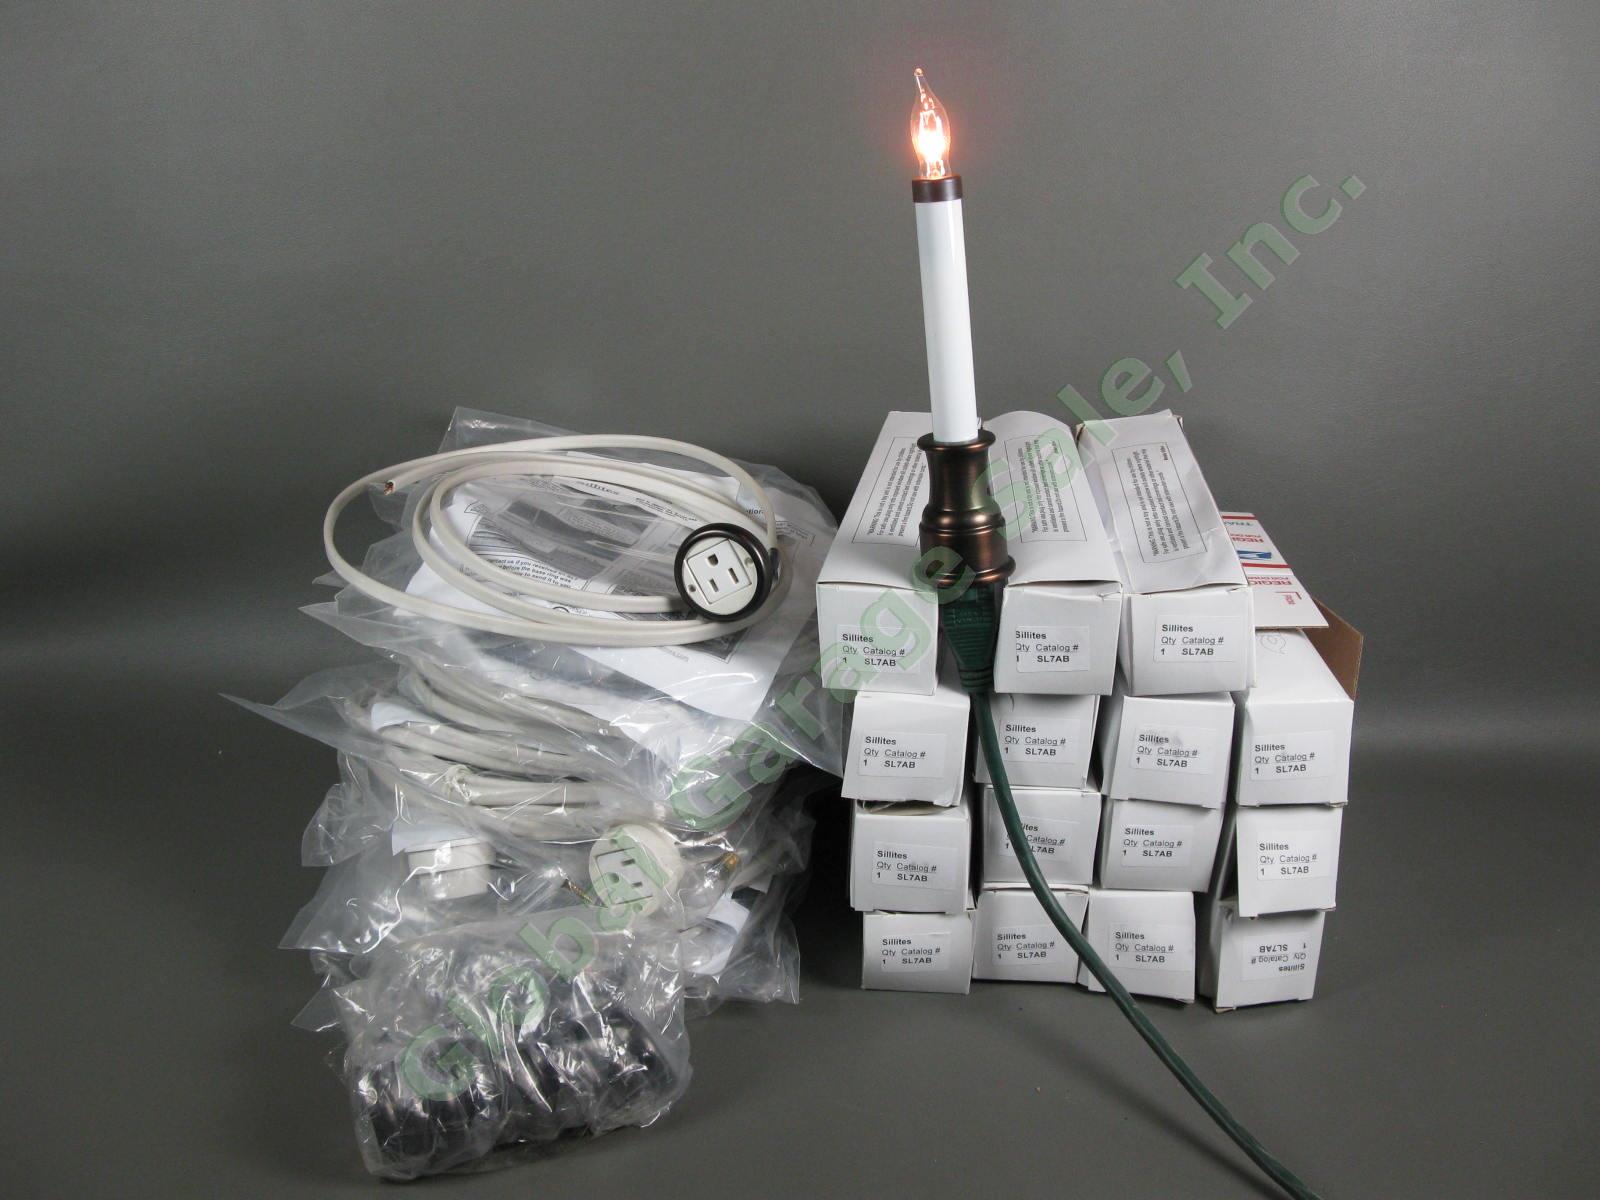 14 Complete Sillites Window Sill Plug in Candle System RR9W Receptacle SL7AB